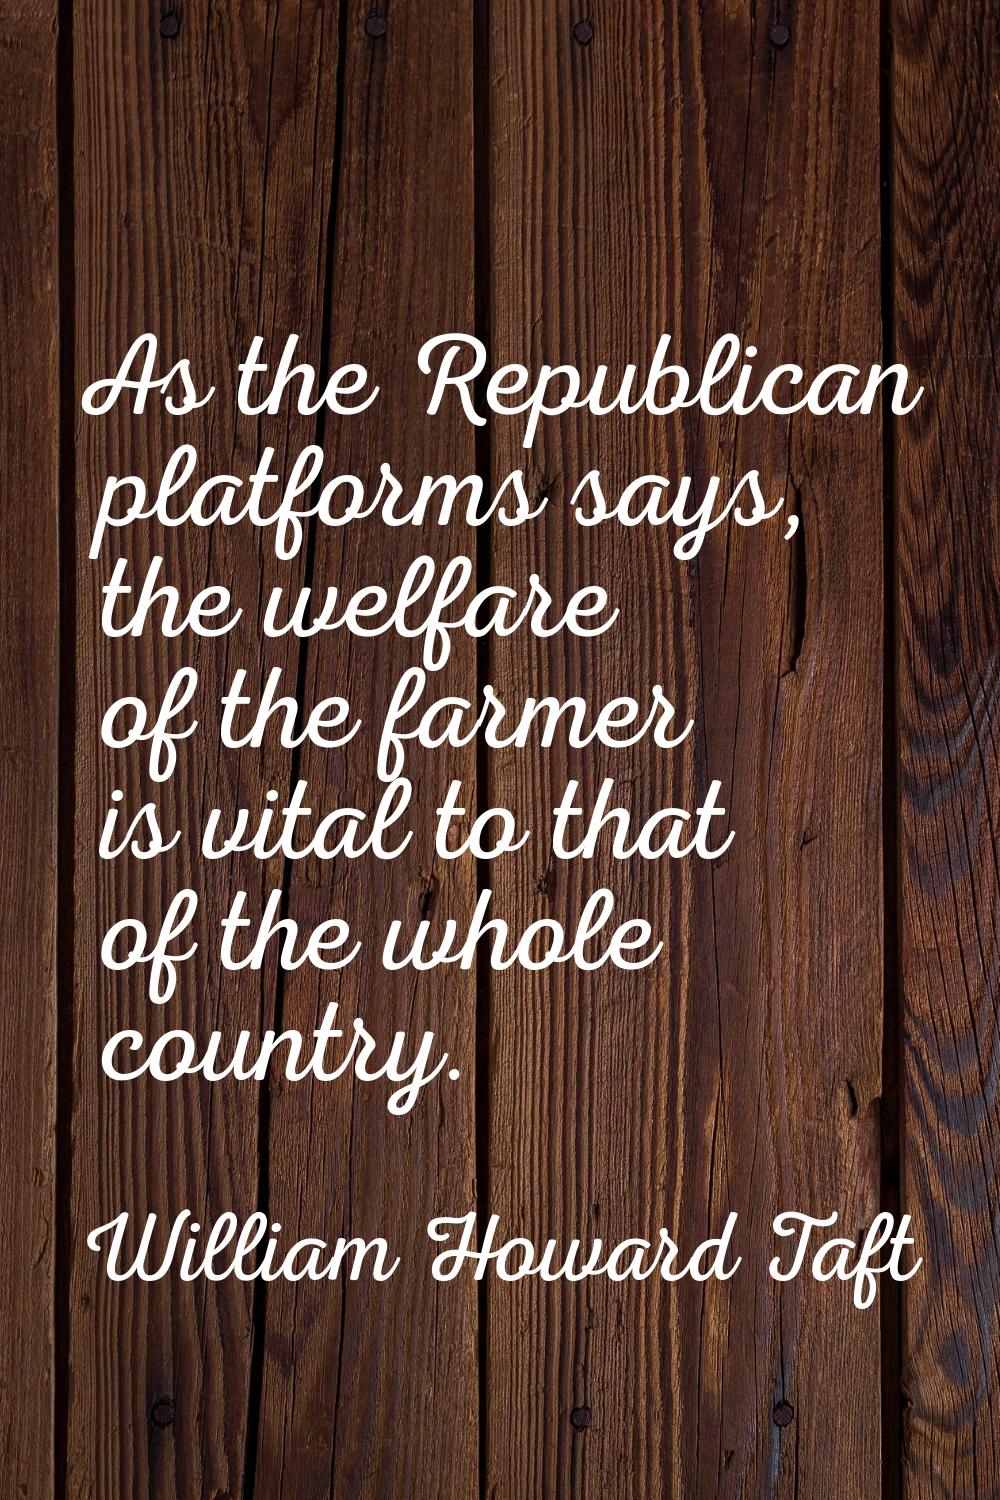 As the Republican platforms says, the welfare of the farmer is vital to that of the whole country.